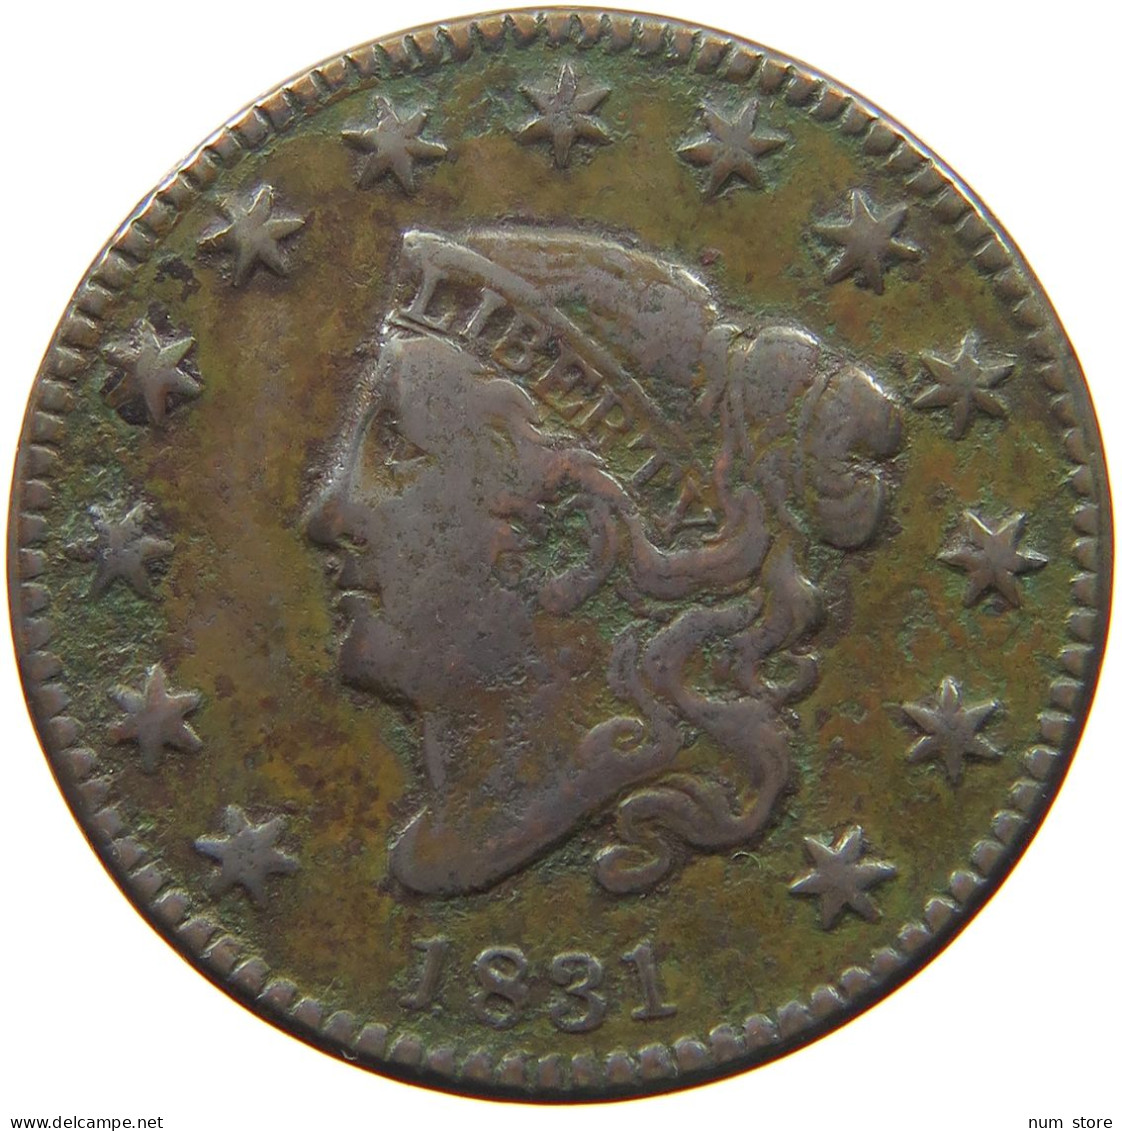 UNITED STATES OF AMERICA LARGE CENT 1831 CORONET HEAD #t141 0273 - 1816-1839: Coronet Head (Tête Couronnée)